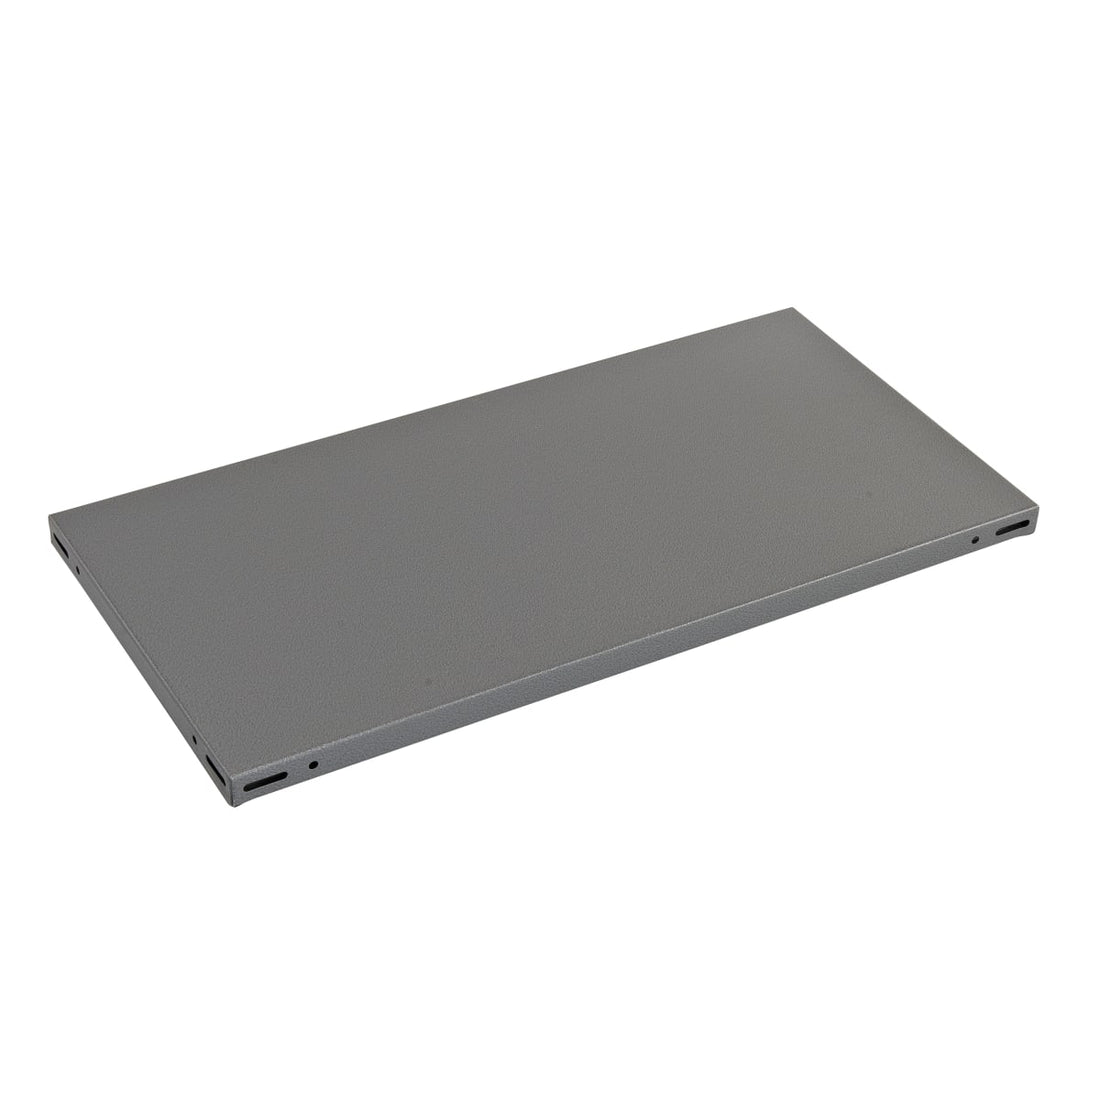 W100xD60 CM LOAD CAPACITY 200KG METAL BRICKETED GREY COLOUR